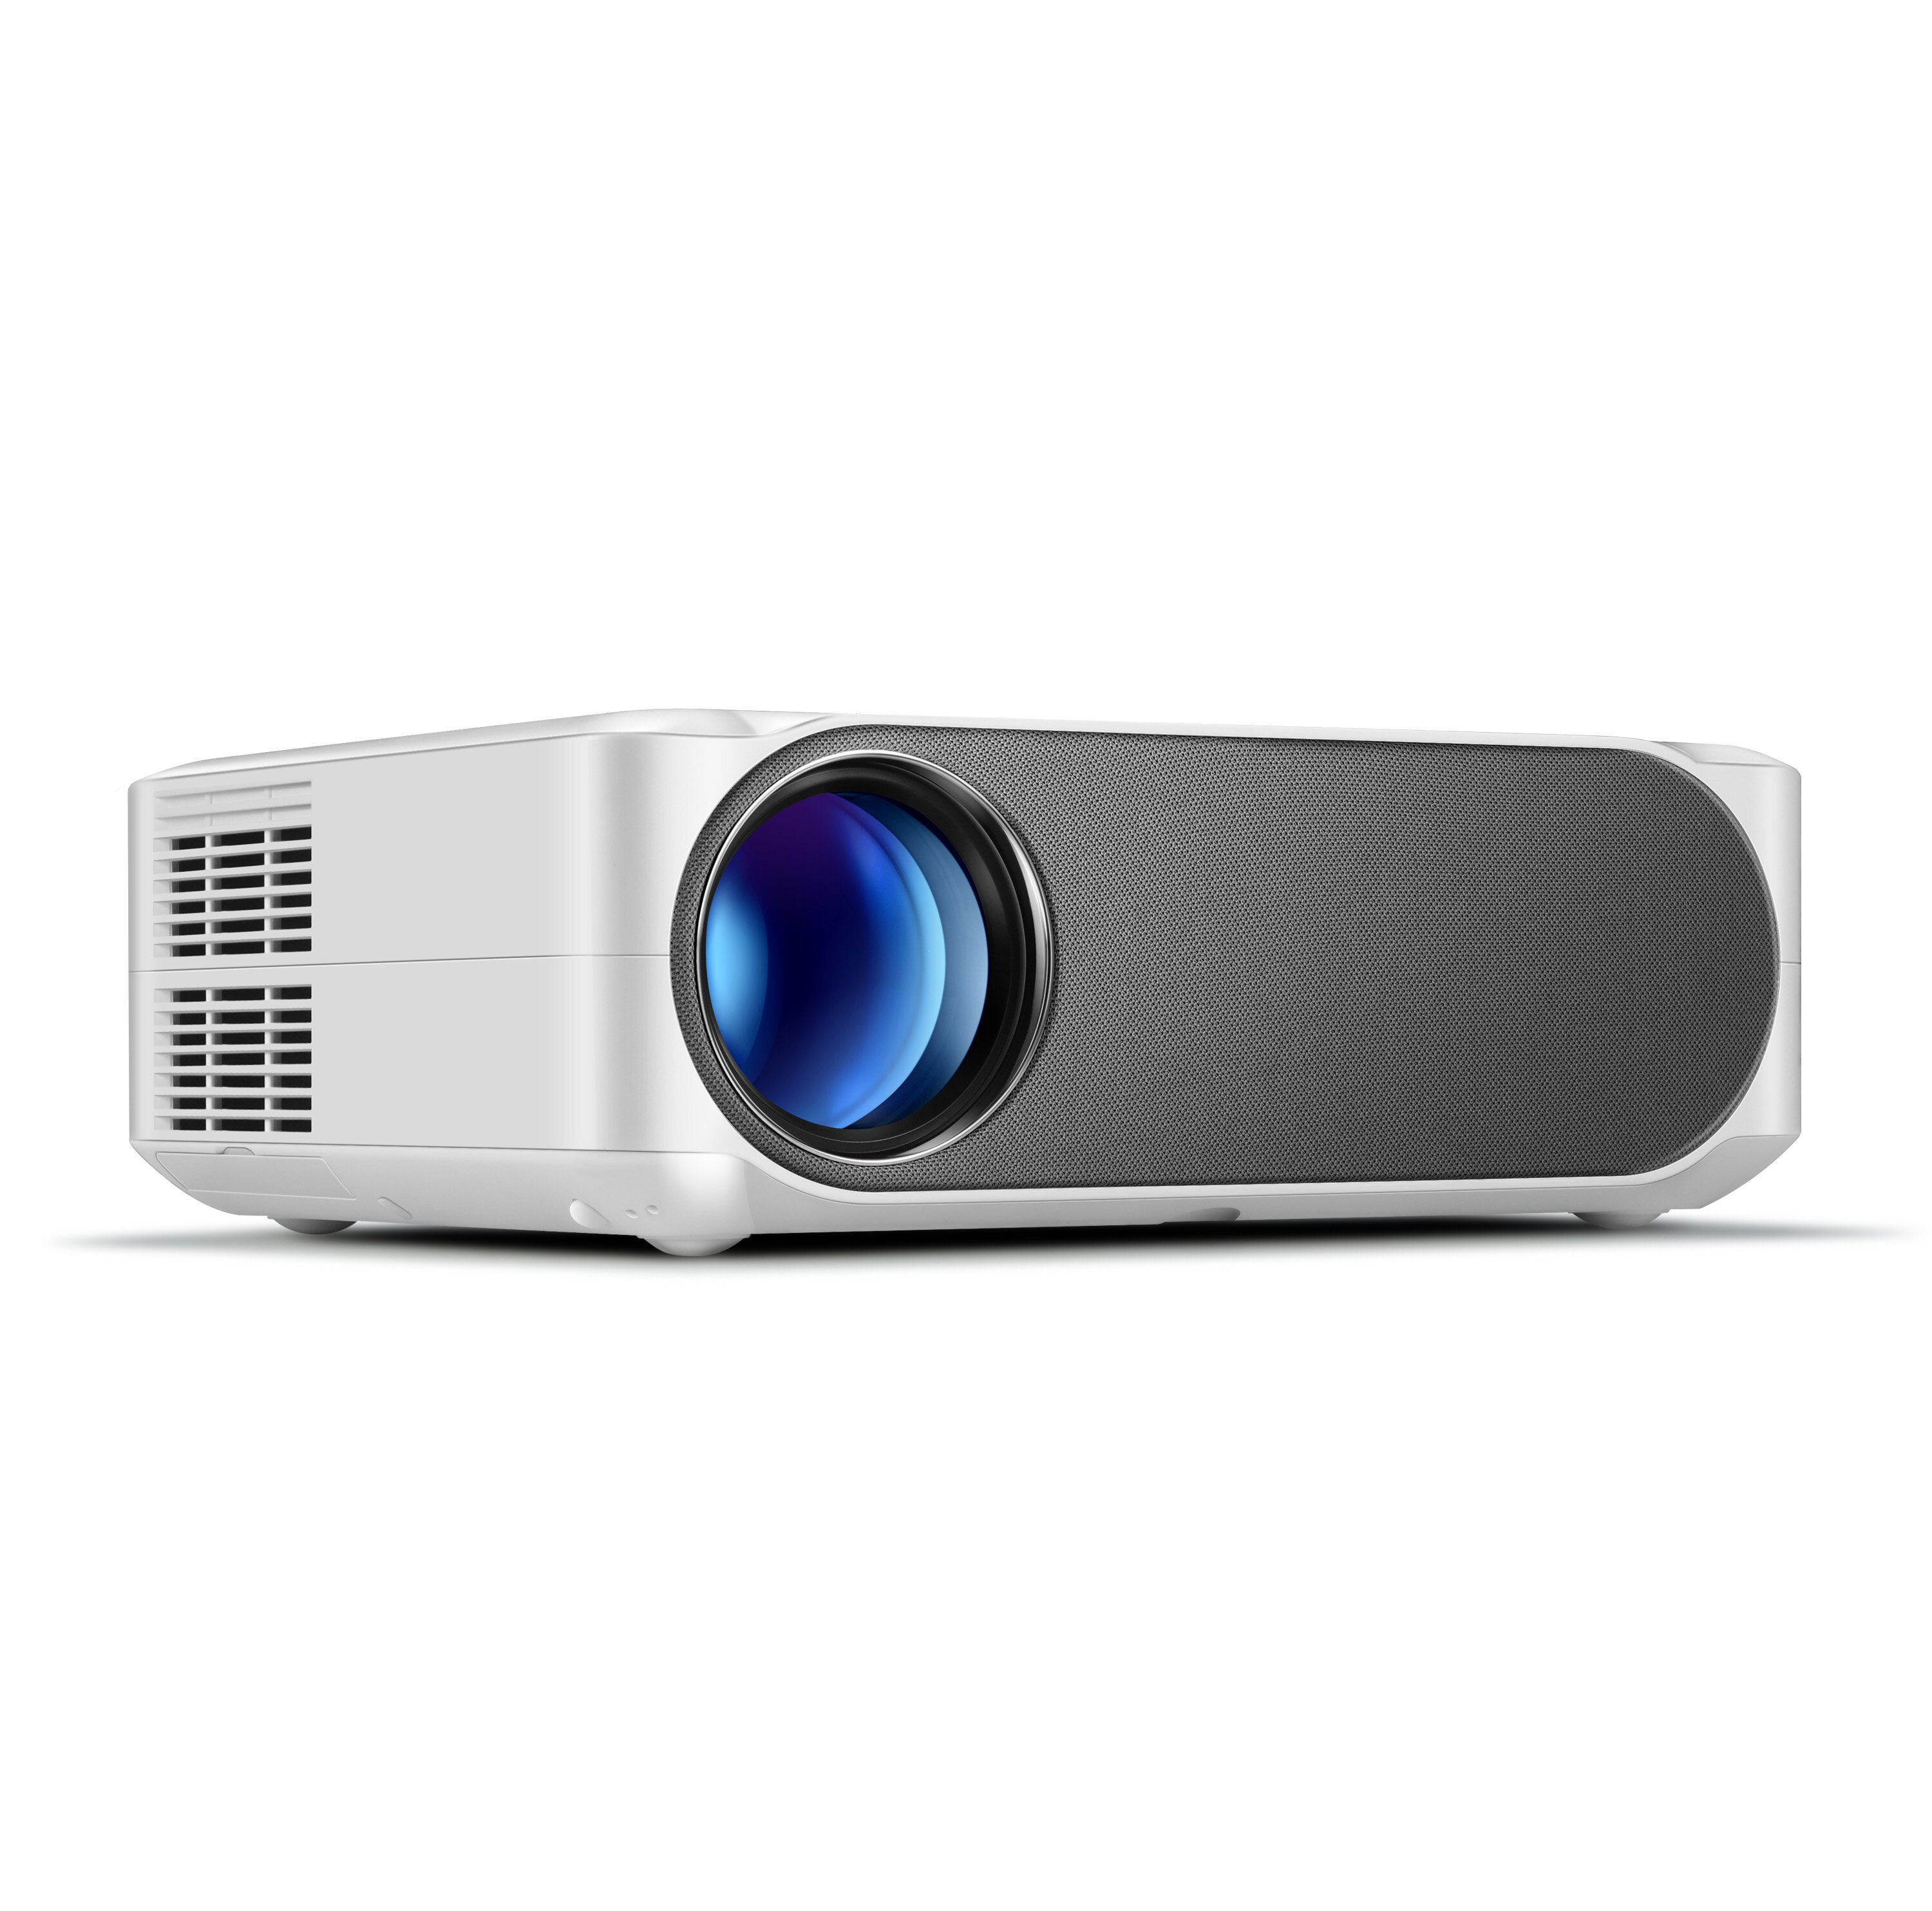 

AUN AKEY6 Projector Full HD 1080P Resolution 6800 Lumens Built in Multimedia System Video Beamer LED Projector for Home